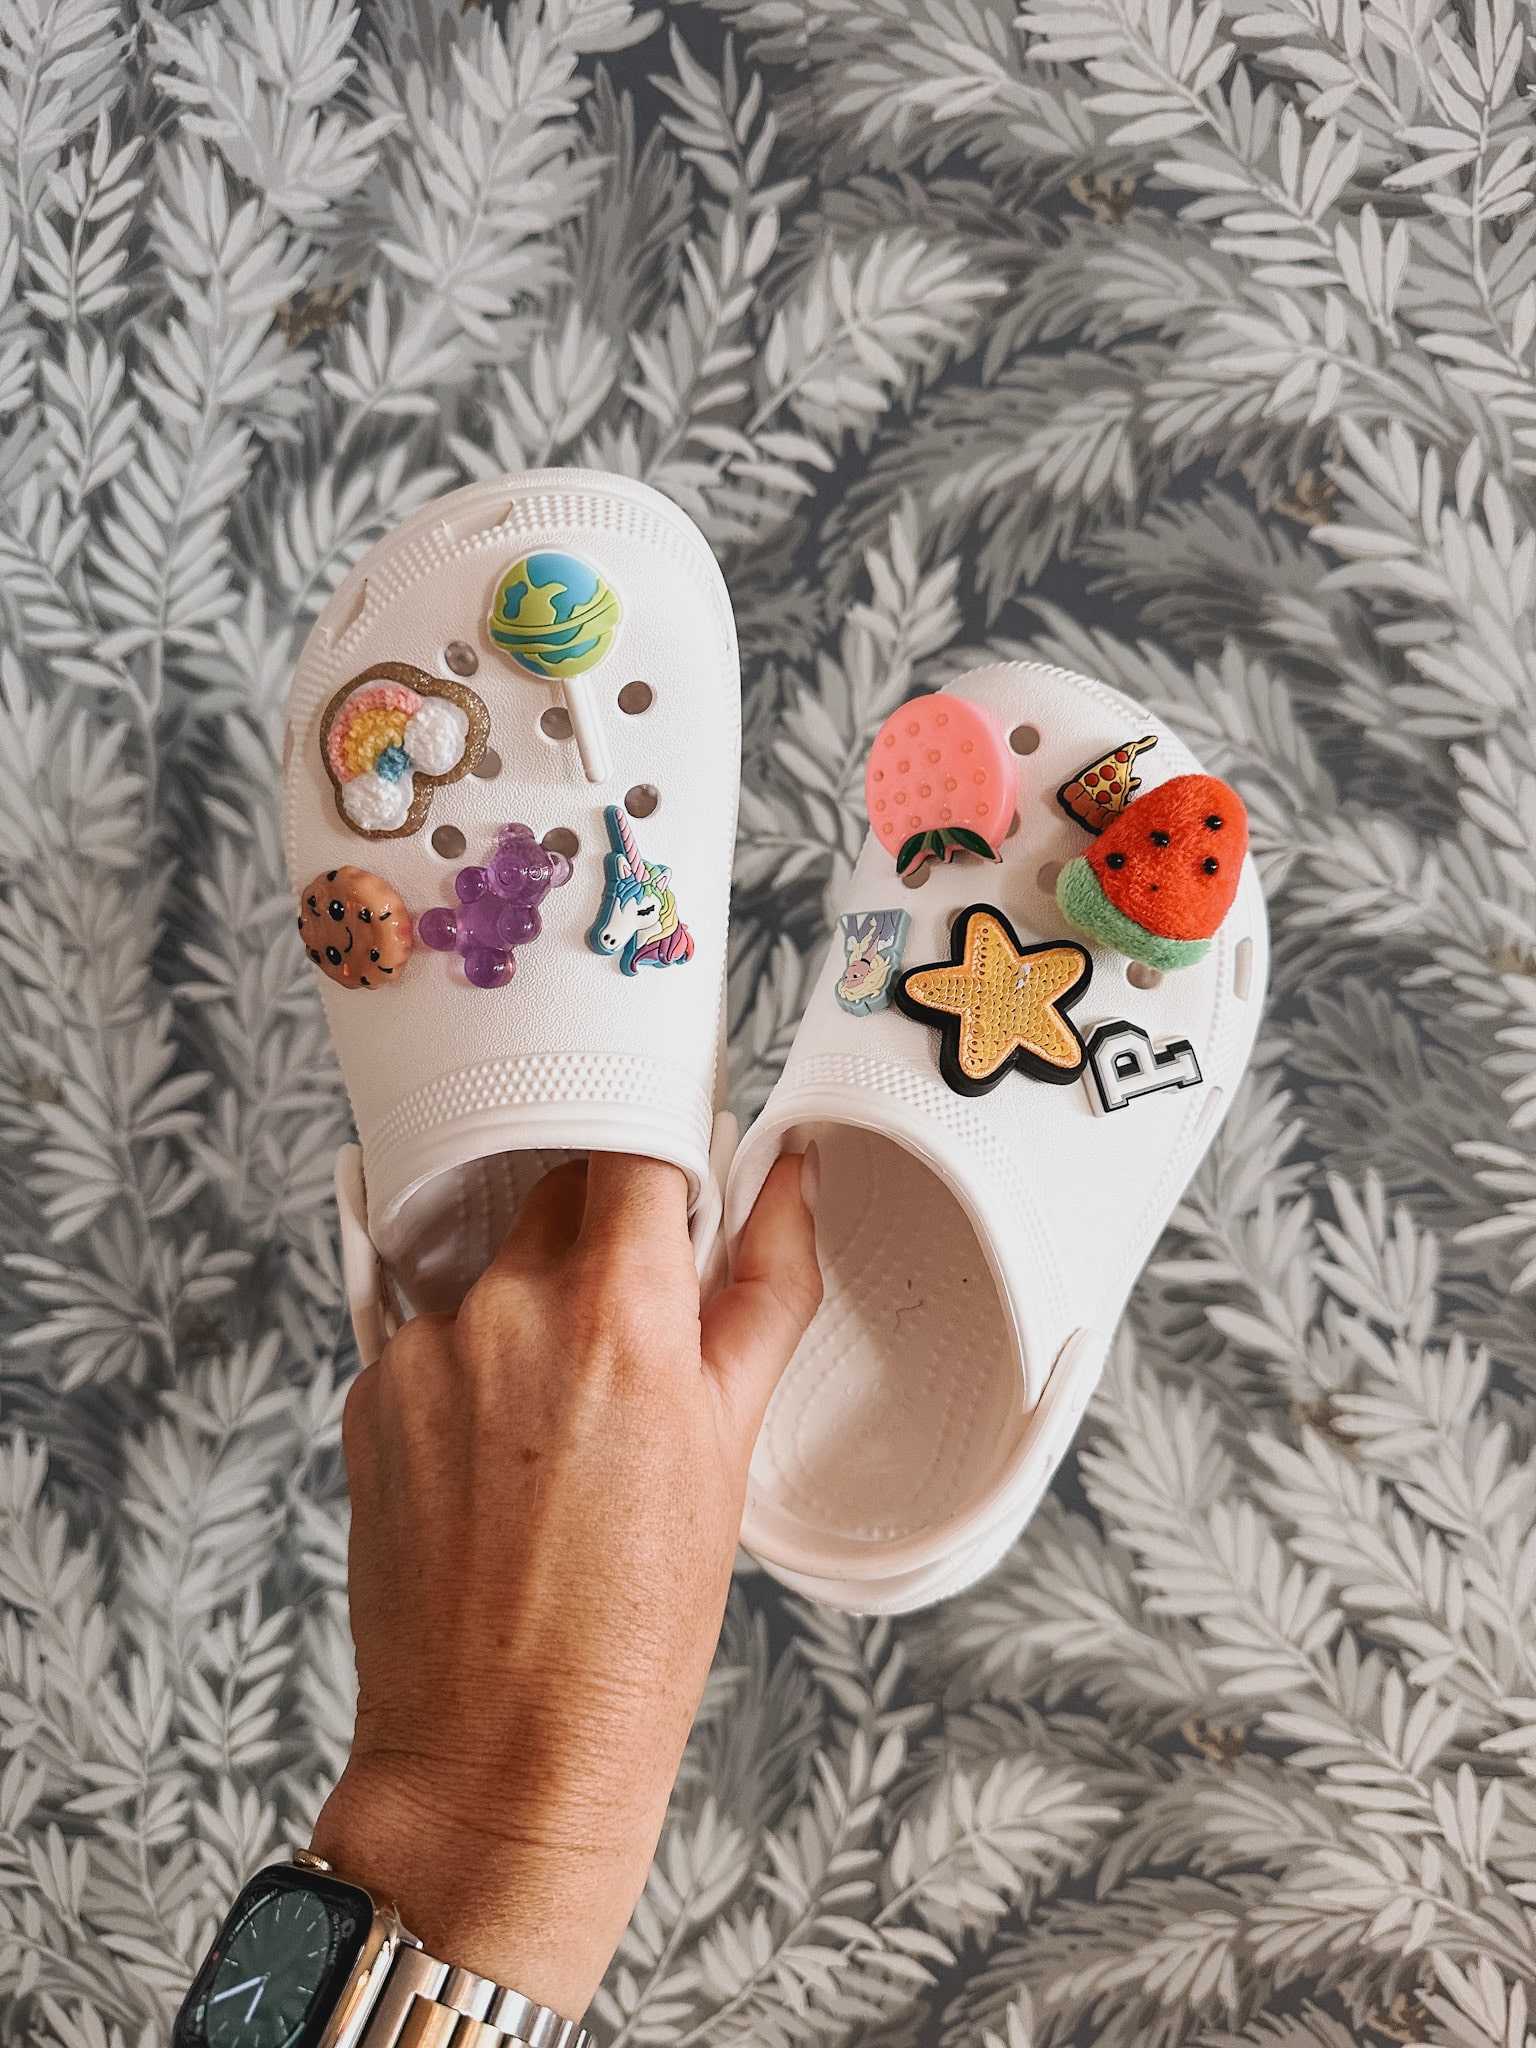 We Are EGG, Wrap up the comfort of love this Valentine's Day! His and Hers  Crocs – the perfect pair for a cozy and thoughtful gift. Give the gift